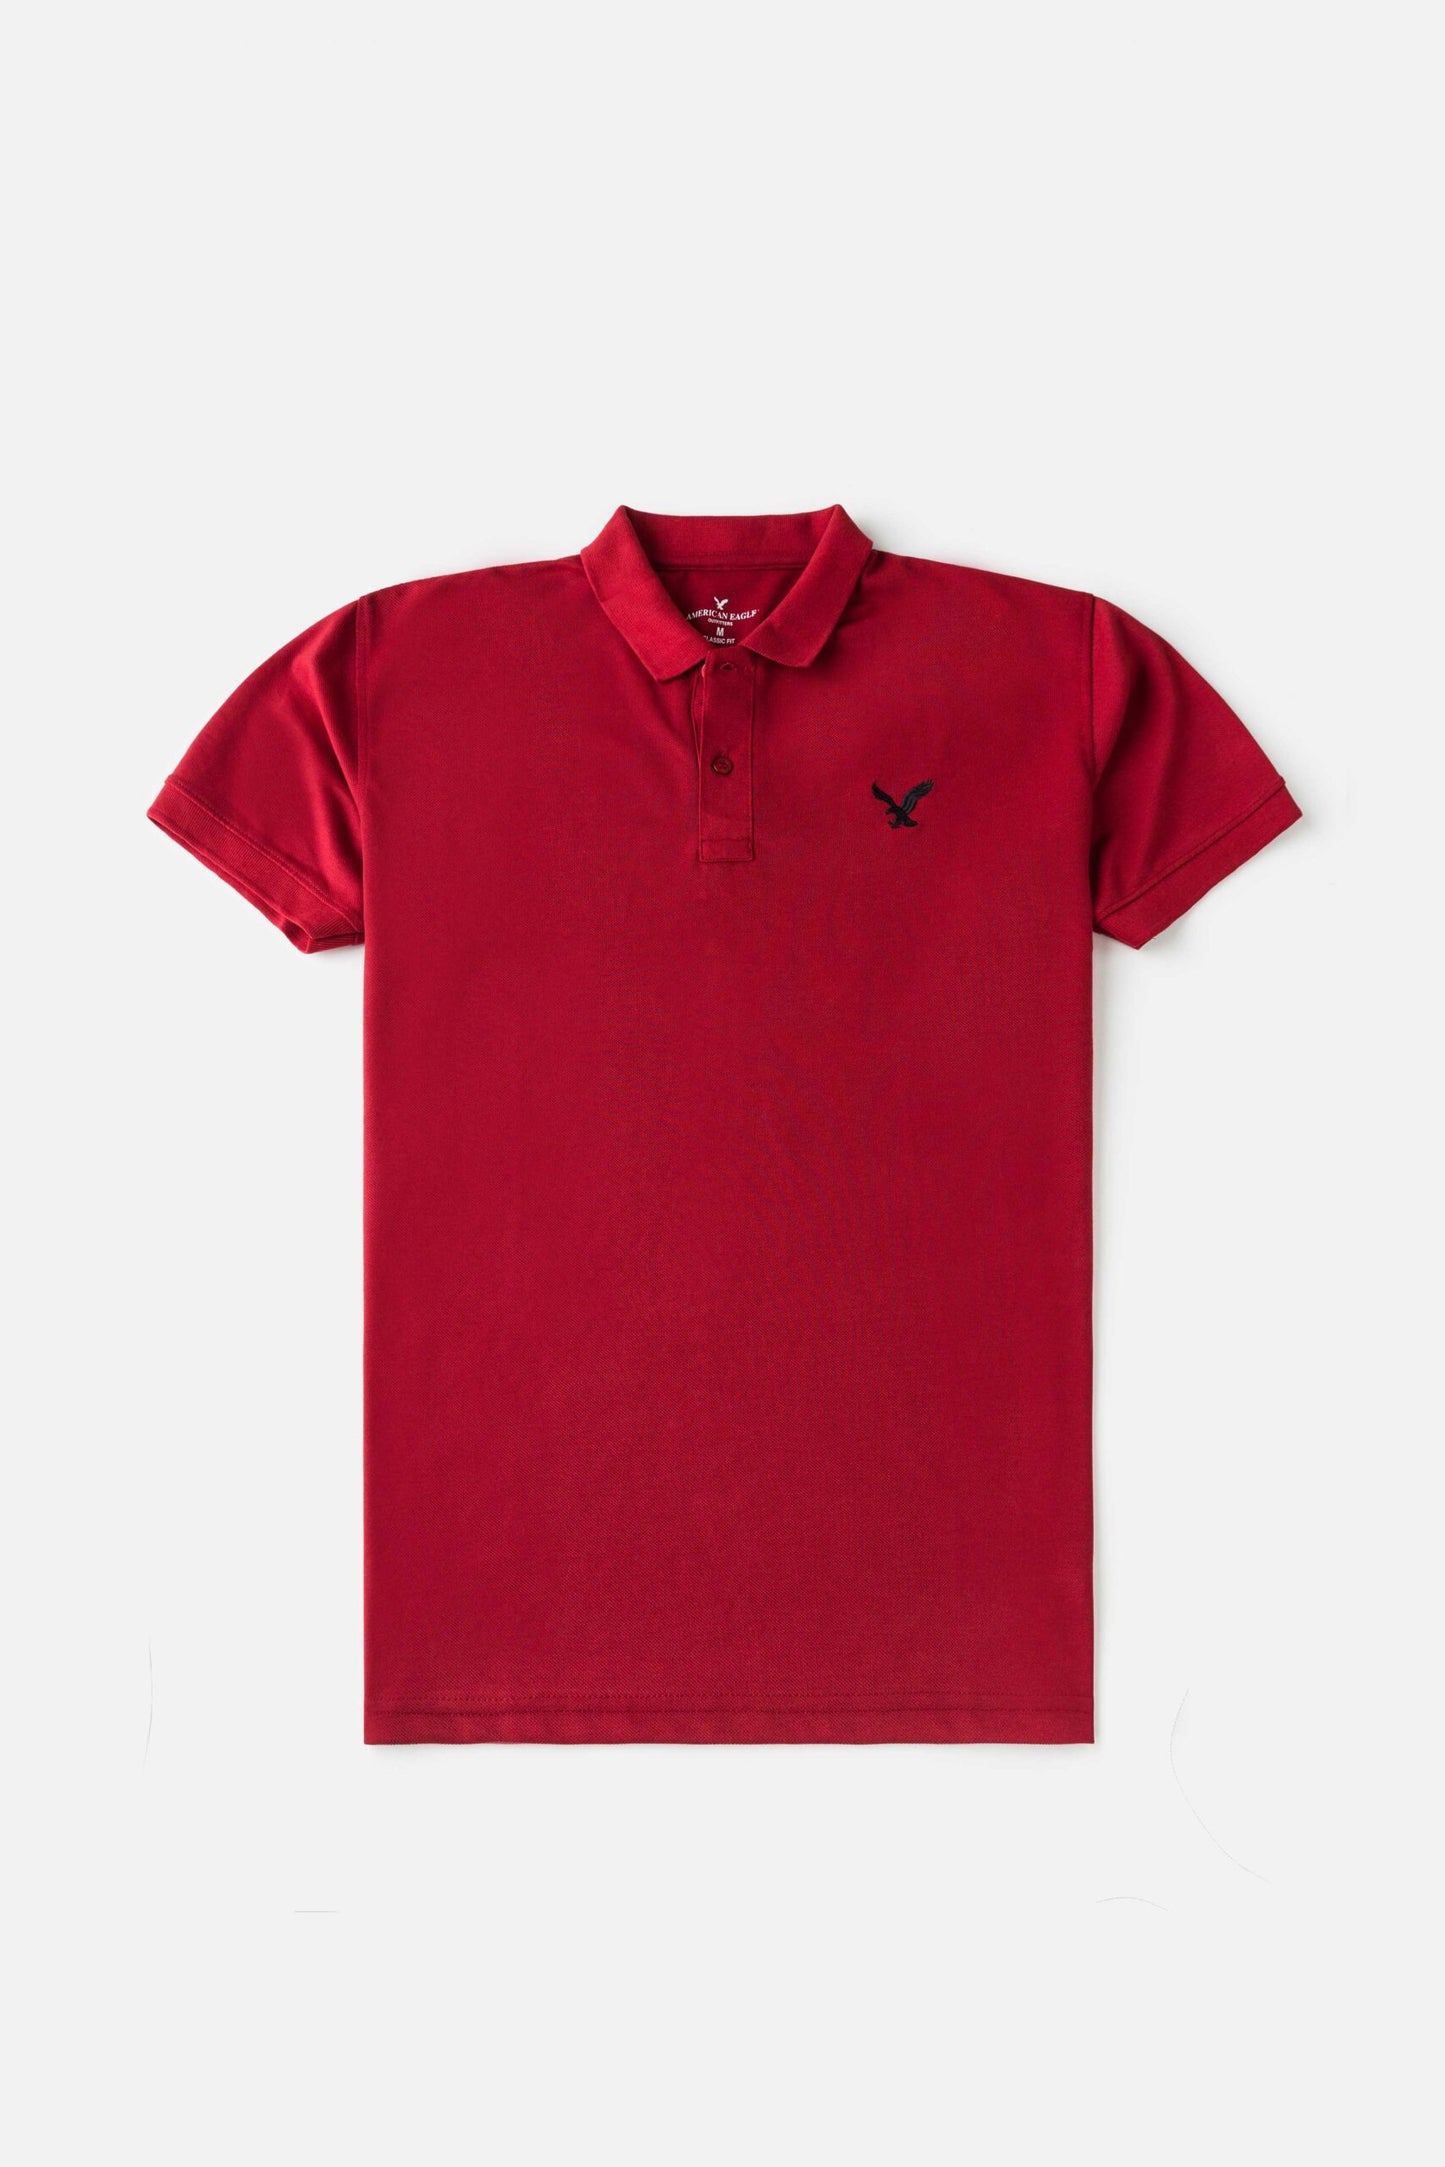 AE Imported Pique Polo shirt – Blood Red